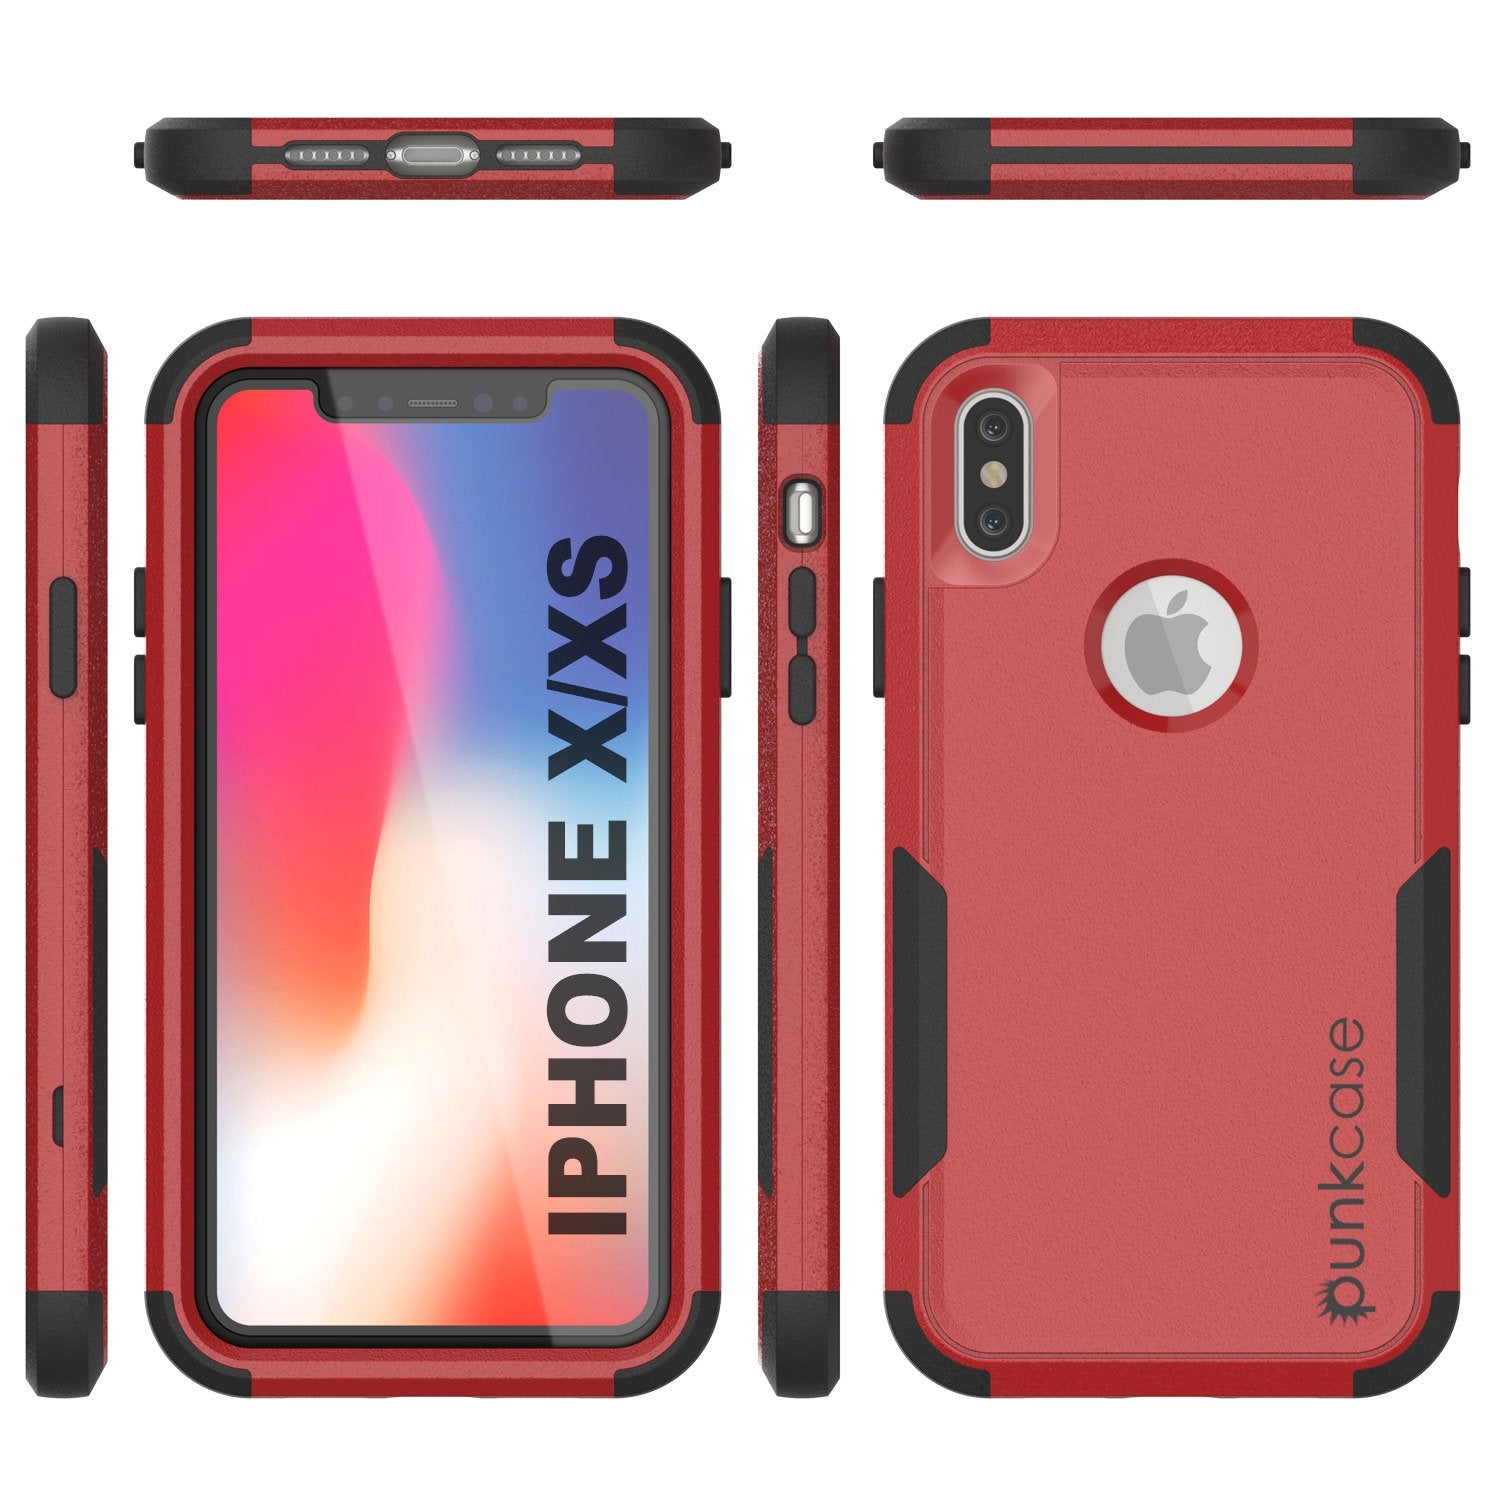 Punkcase for iPhone X Belt Clip Multilayer Holster Case [Patron Series] [Red-Black]